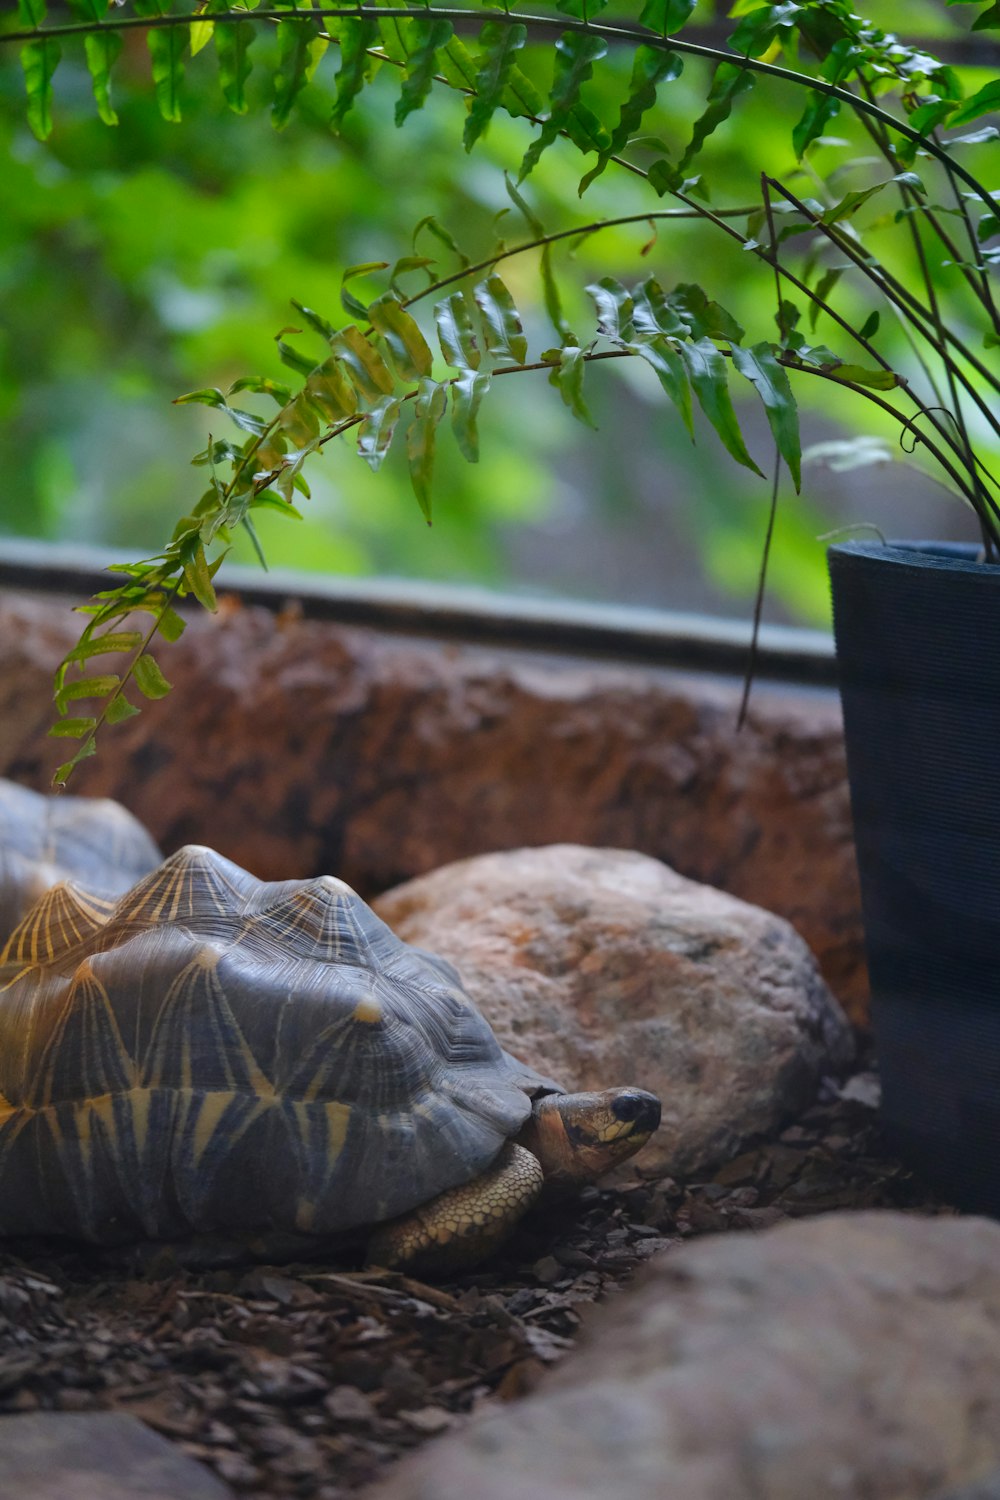 a turtle laying on the ground next to a potted plant